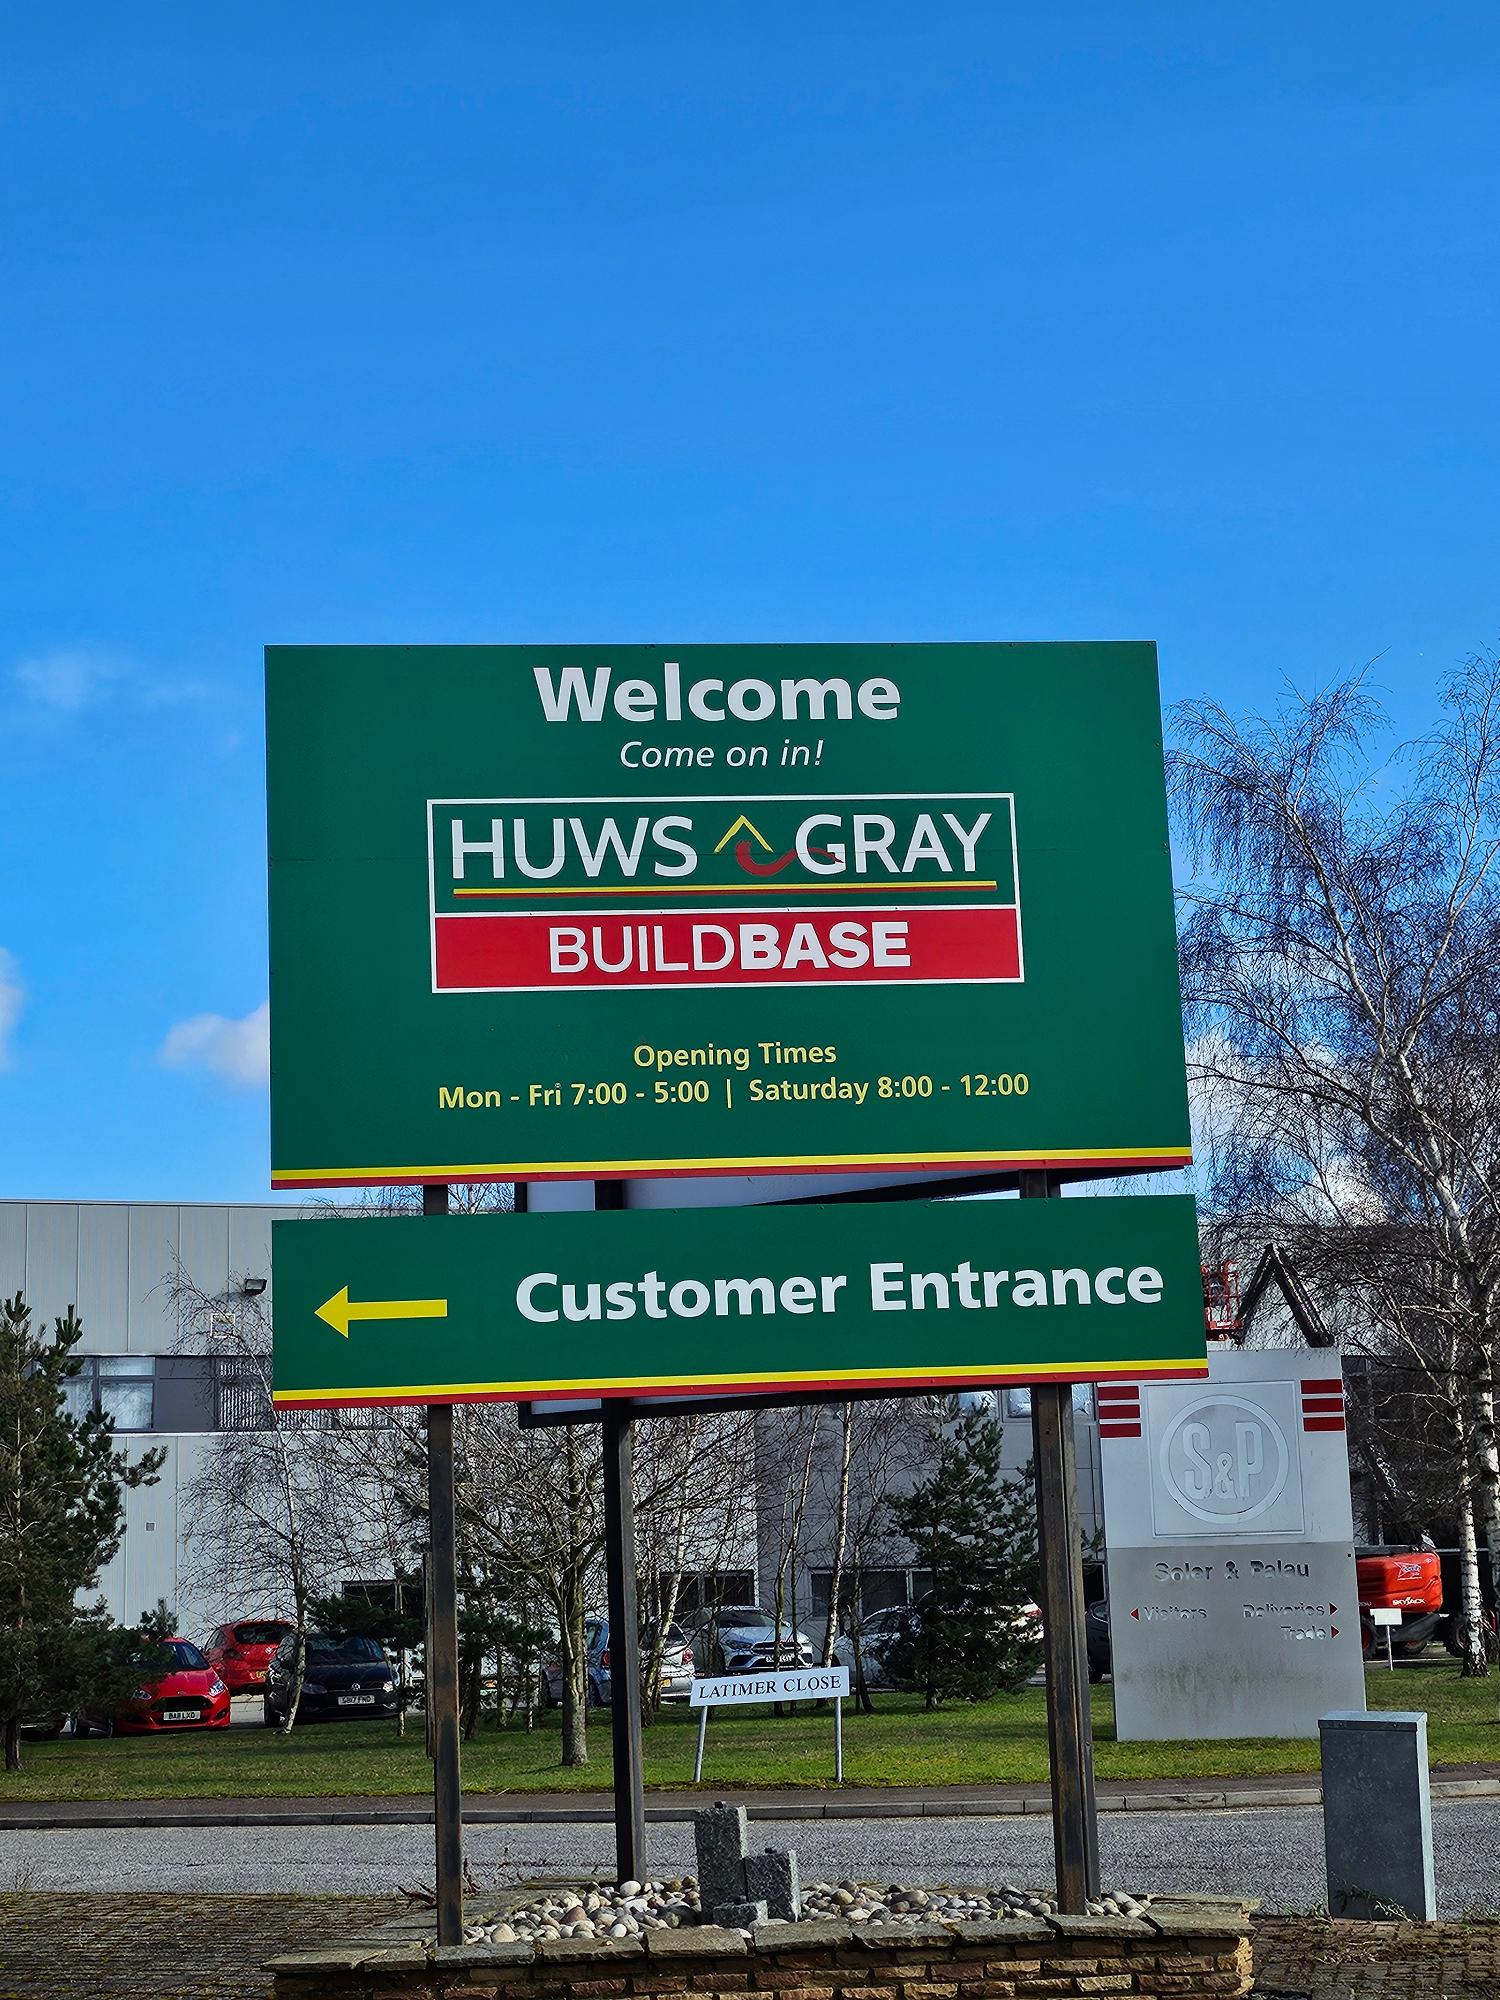 Images Huws Gray Ipswich, Ransomes Europark